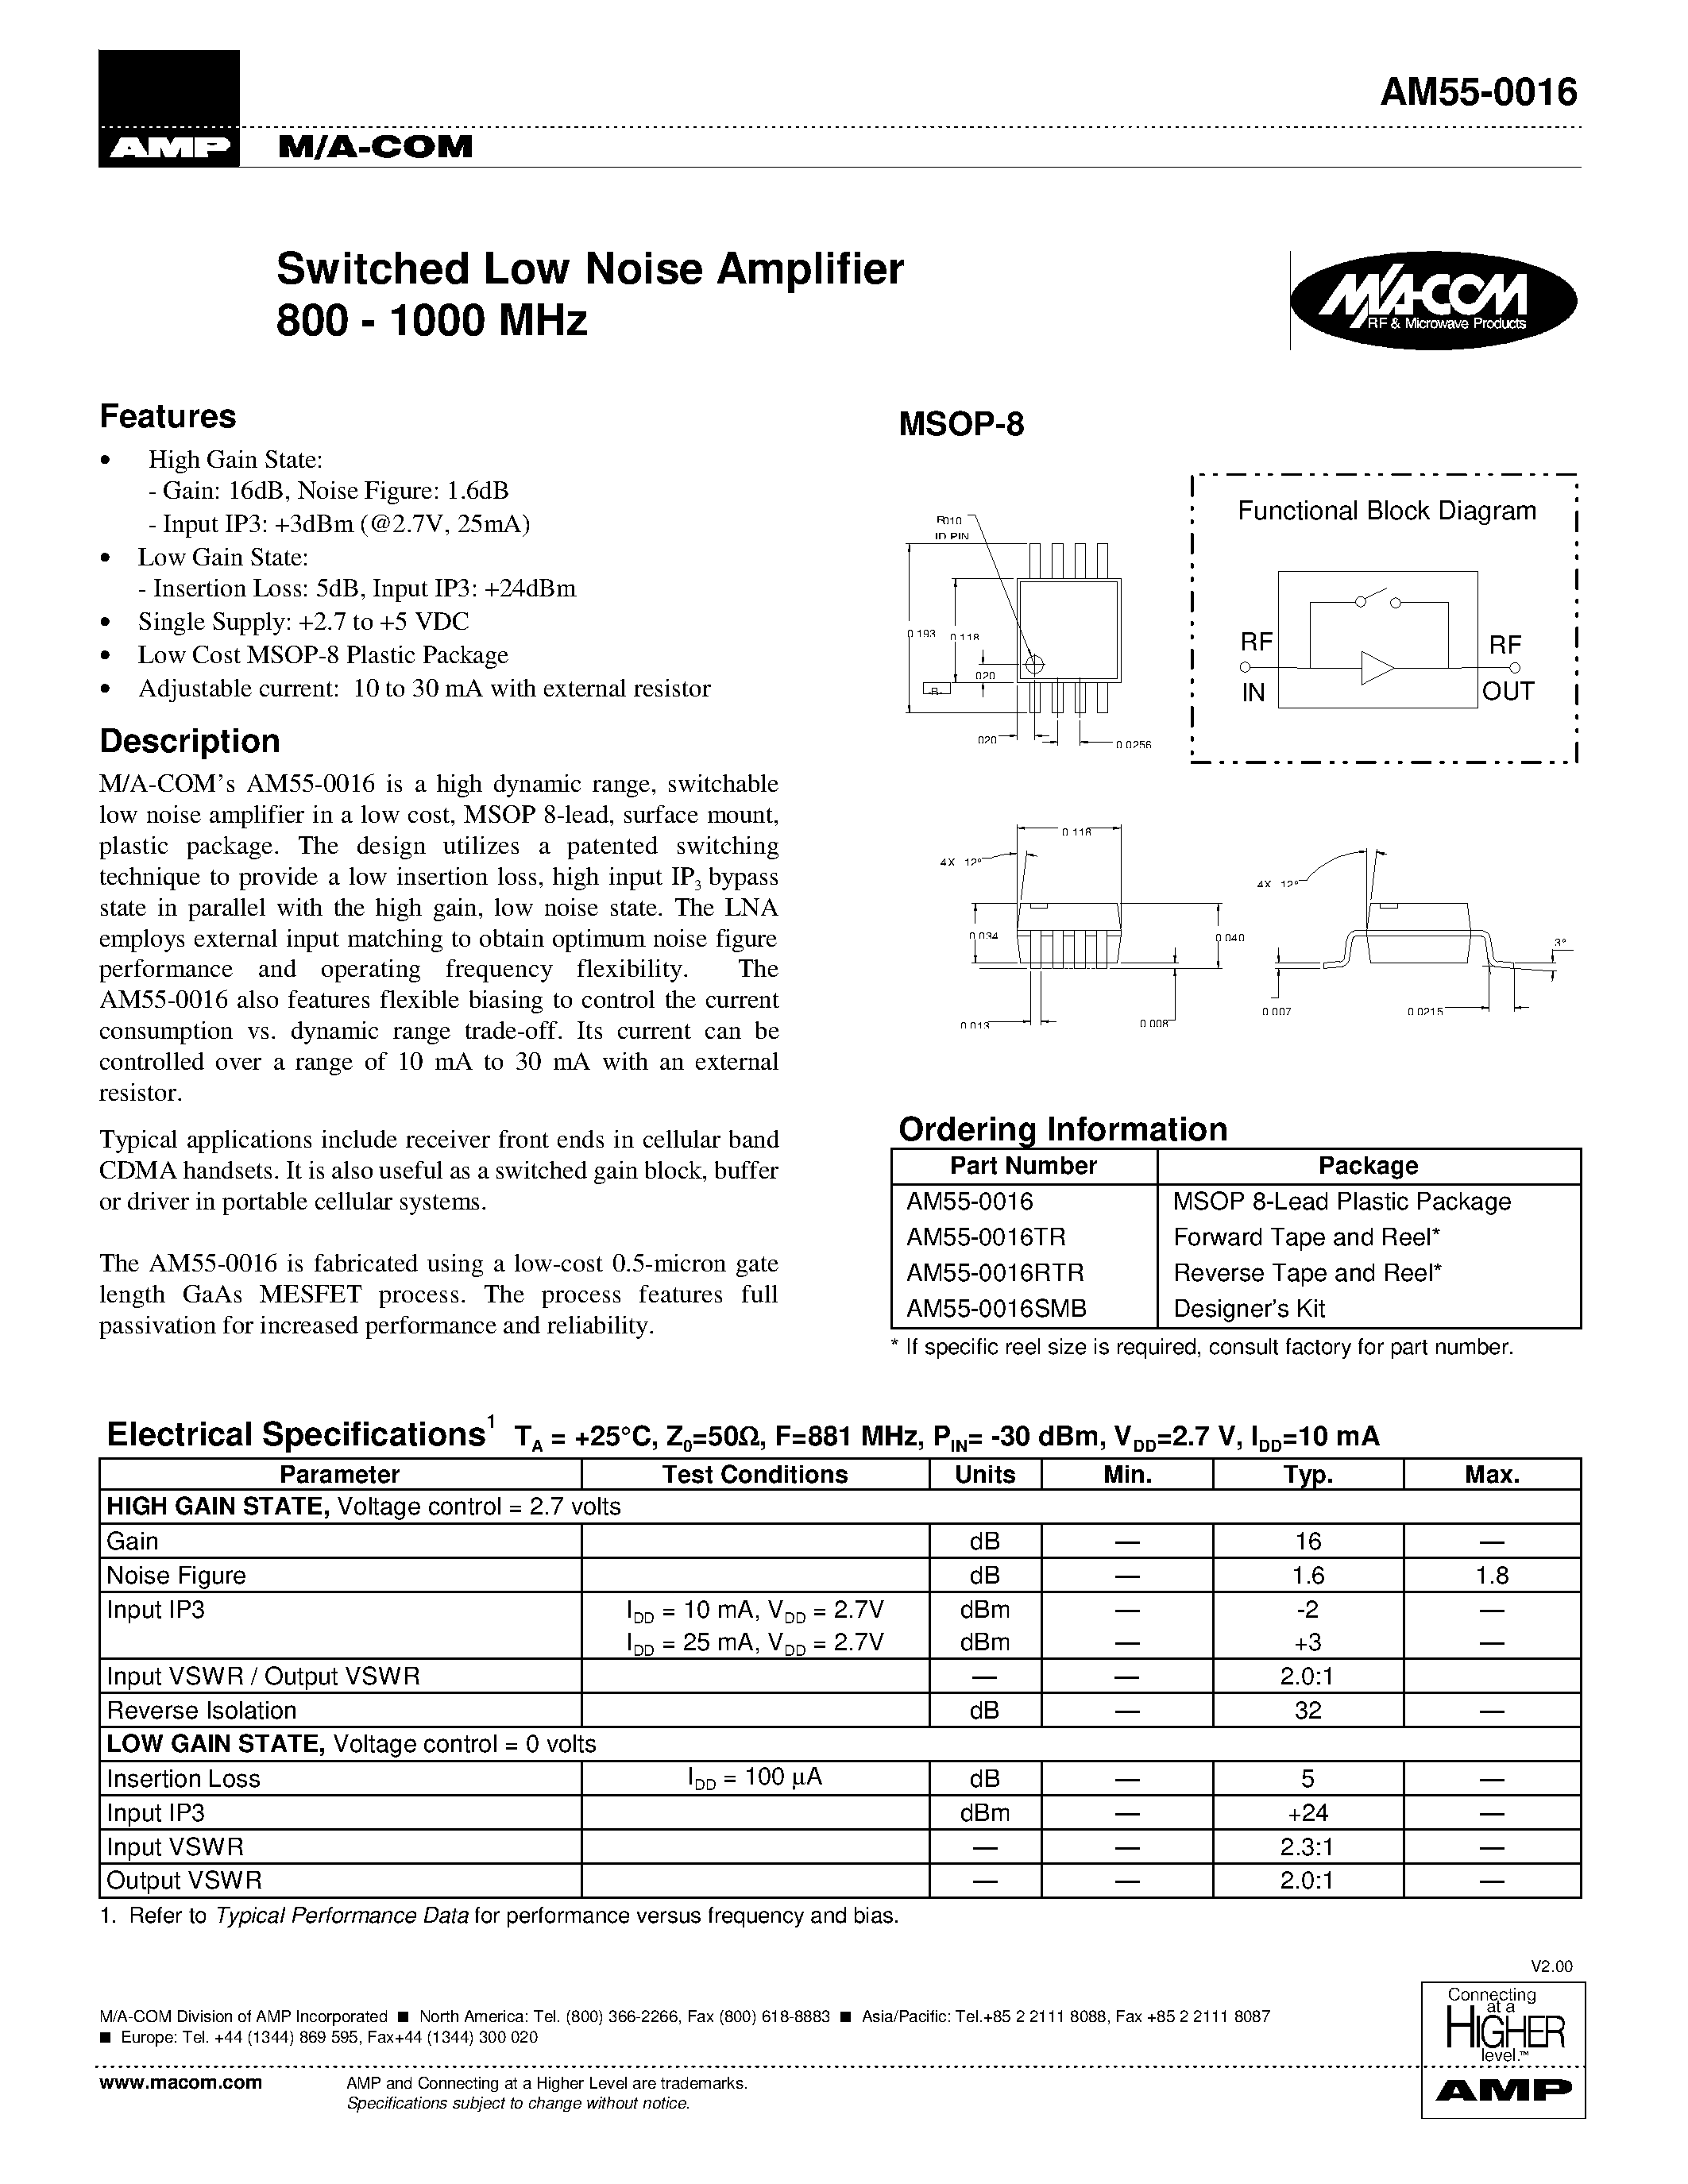 Datasheet AM55-0016SMB - Switched Low Noise Amplifier 800 - 1000 MHz page 1